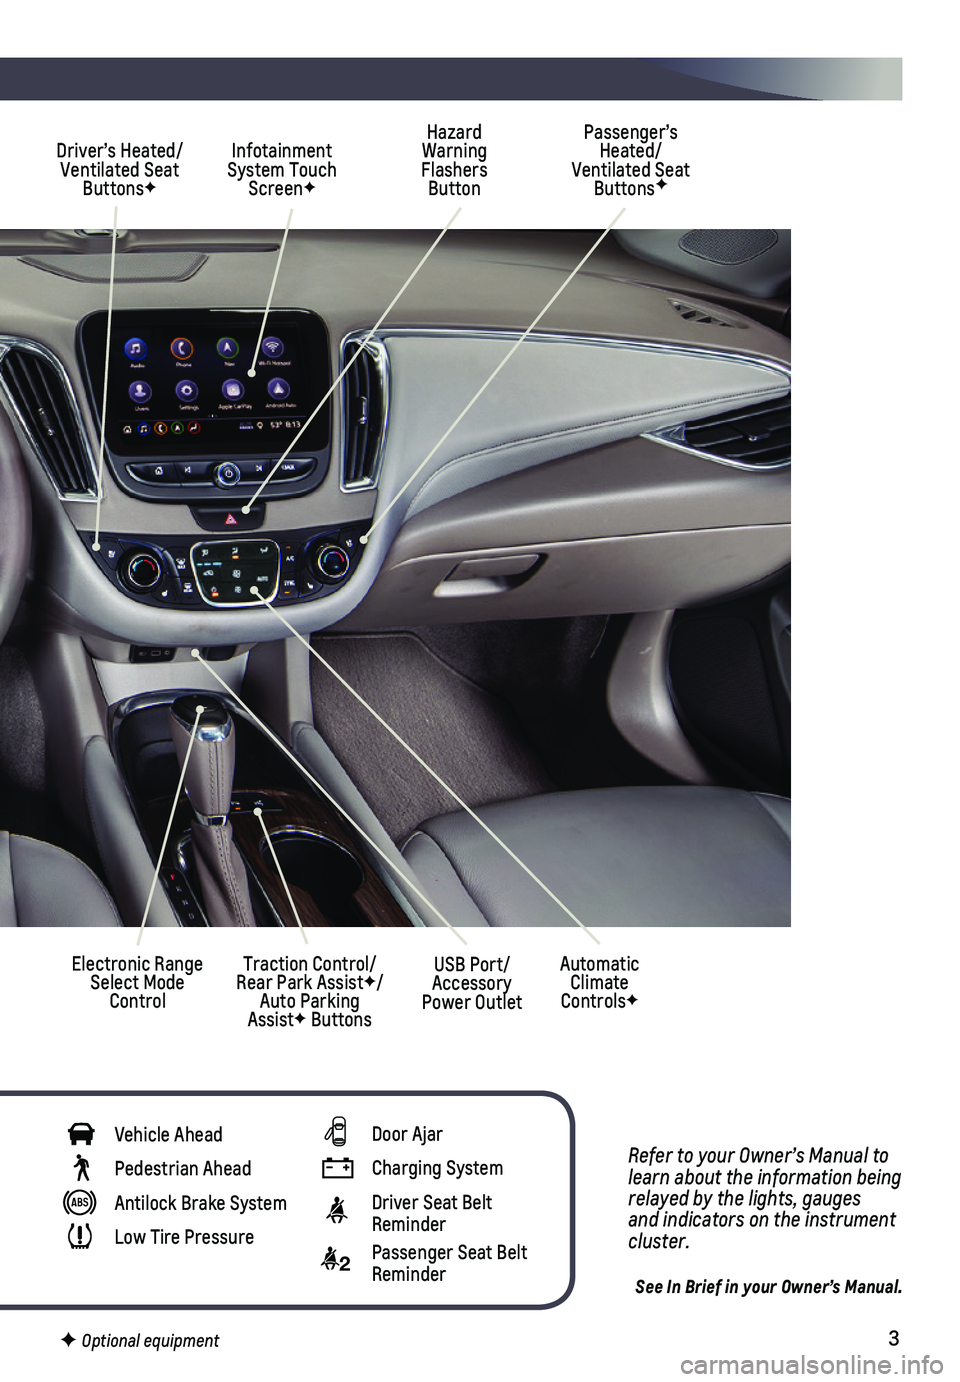 CHEVROLET MALIBU 2020  Get To Know Guide 3
Refer to your Owner’s Manual to learn about the information being relayed by the lights, gauges and indicators on the instrument cluster.
See In Brief in your Owner’s Manual.
Hazard Warning Flas